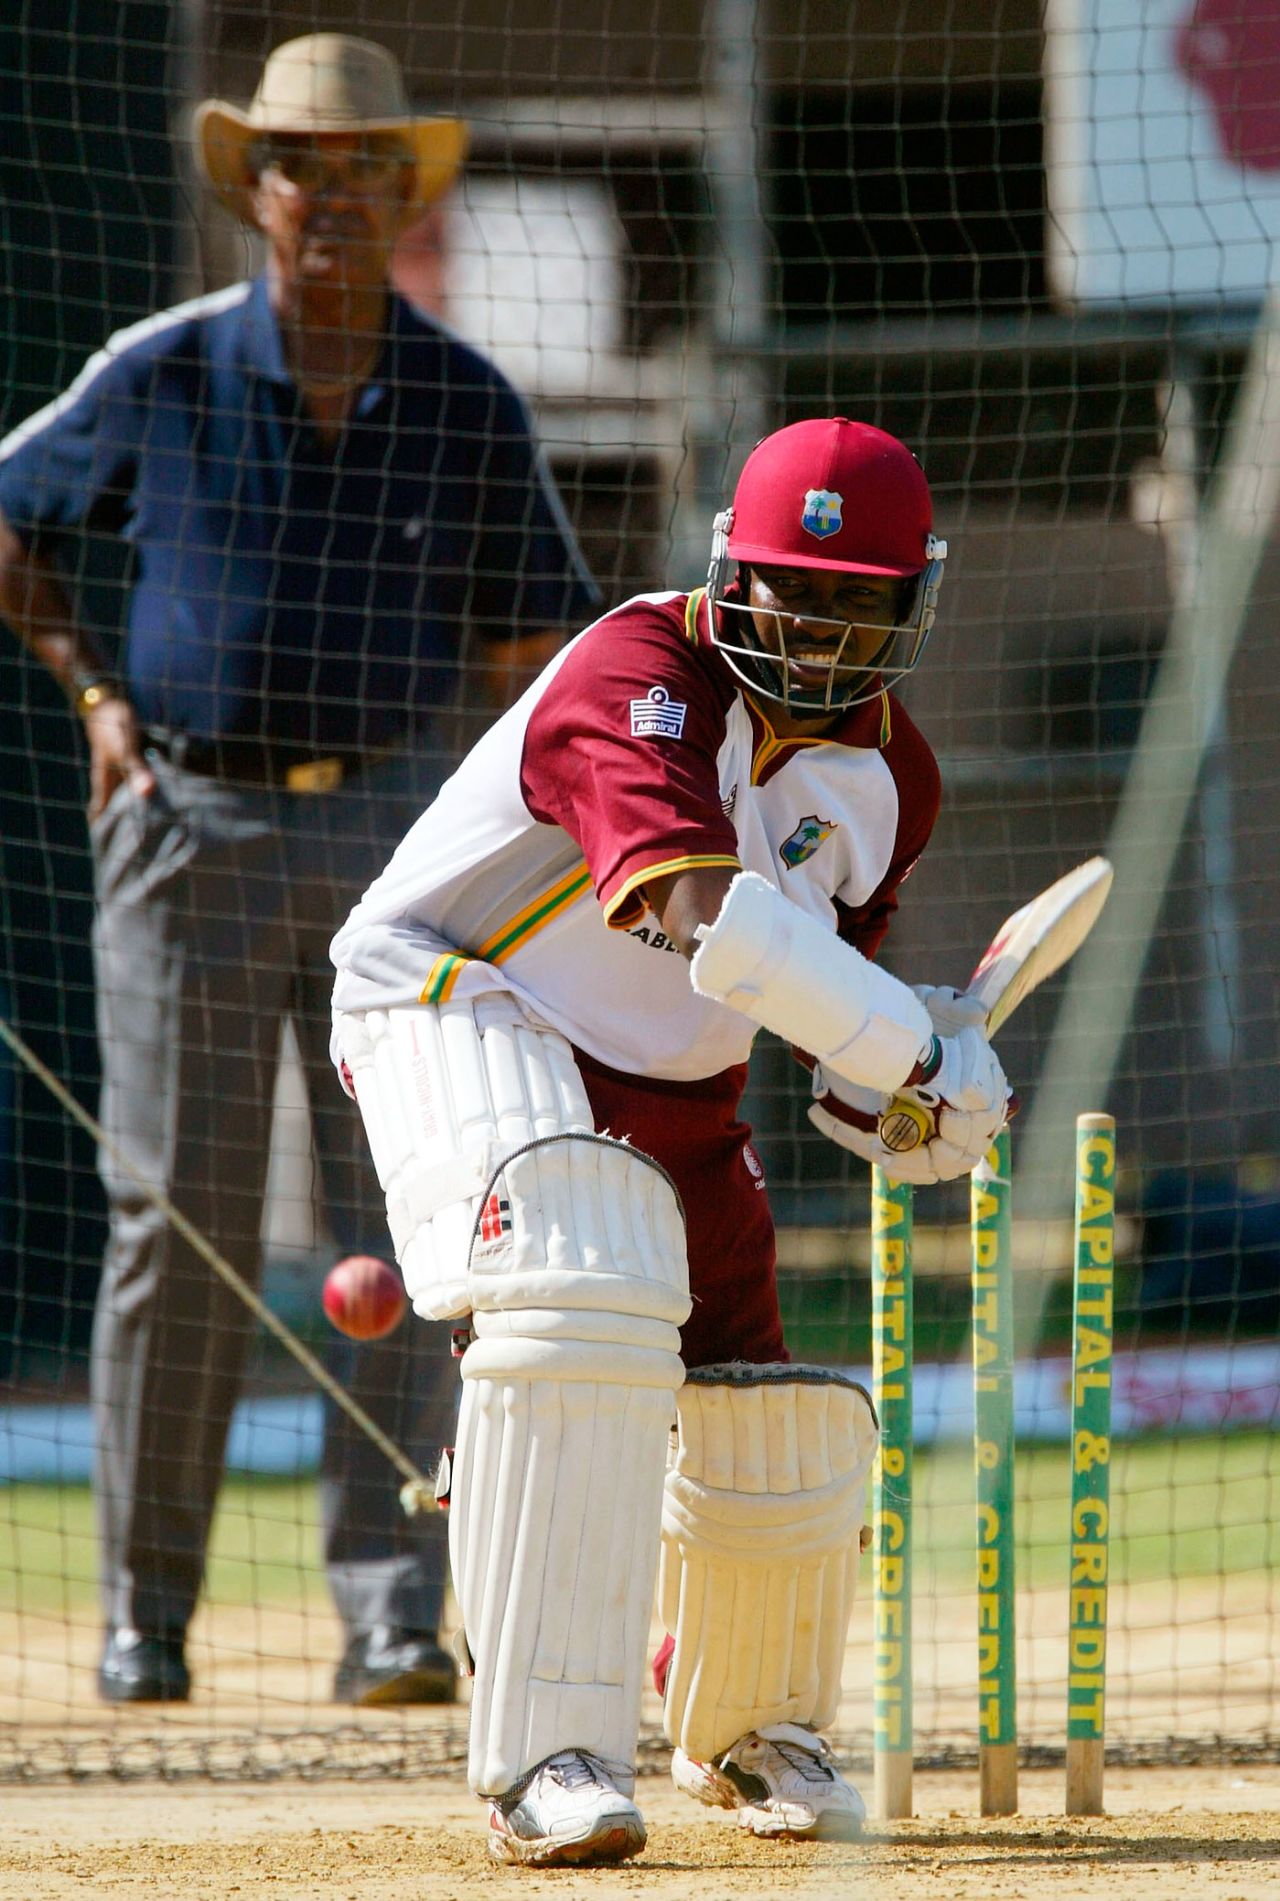 Garry Sobers watches Brian Lara bat in the nets, Kingston, March 10, 2004